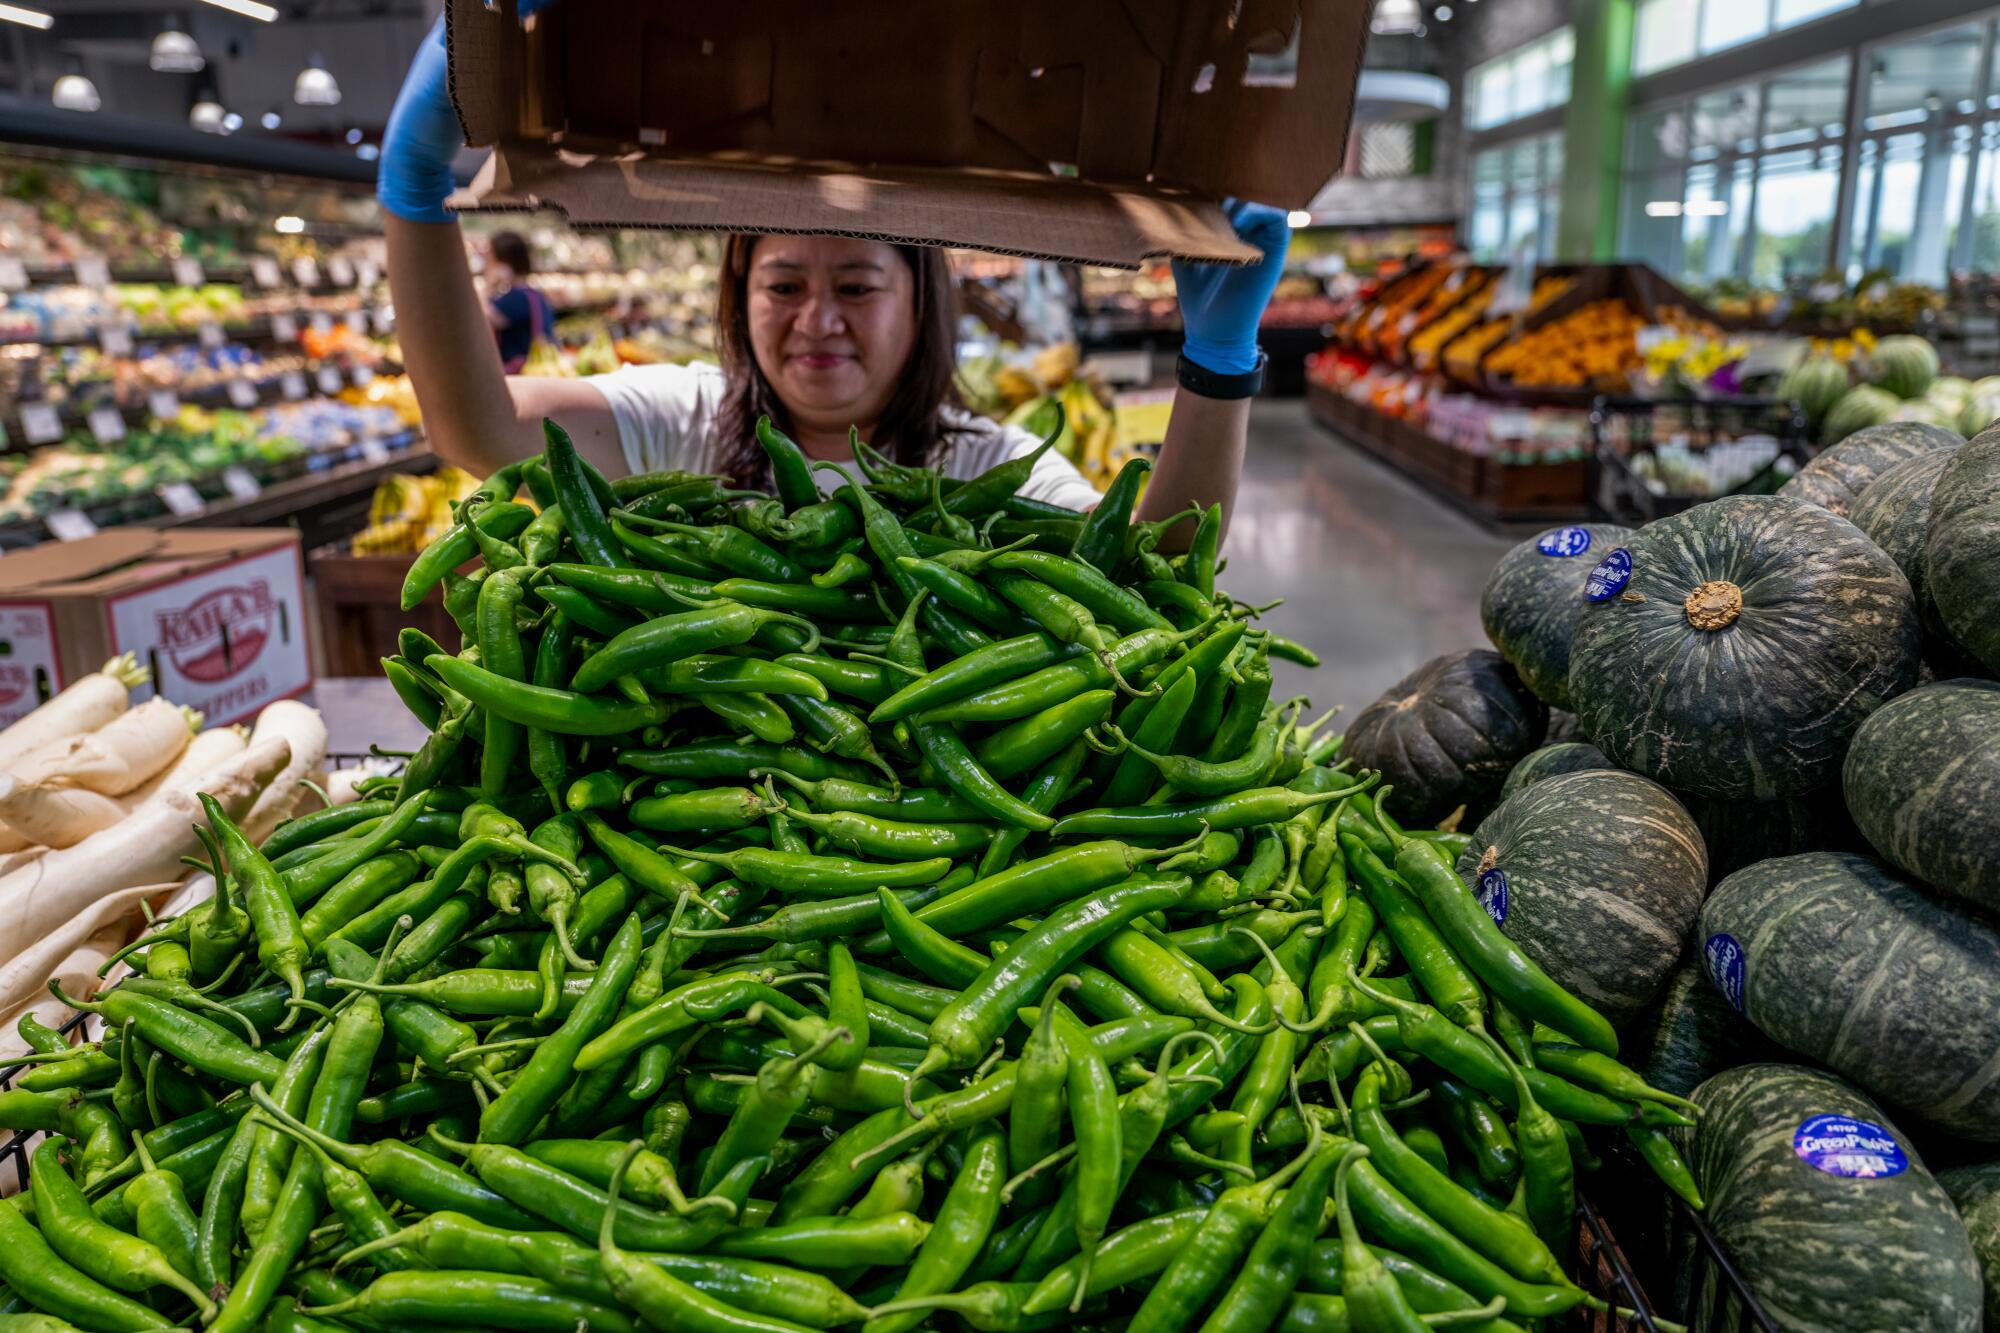 A store clerk adds more fresh sweet chiles to a display pile in the produce area.